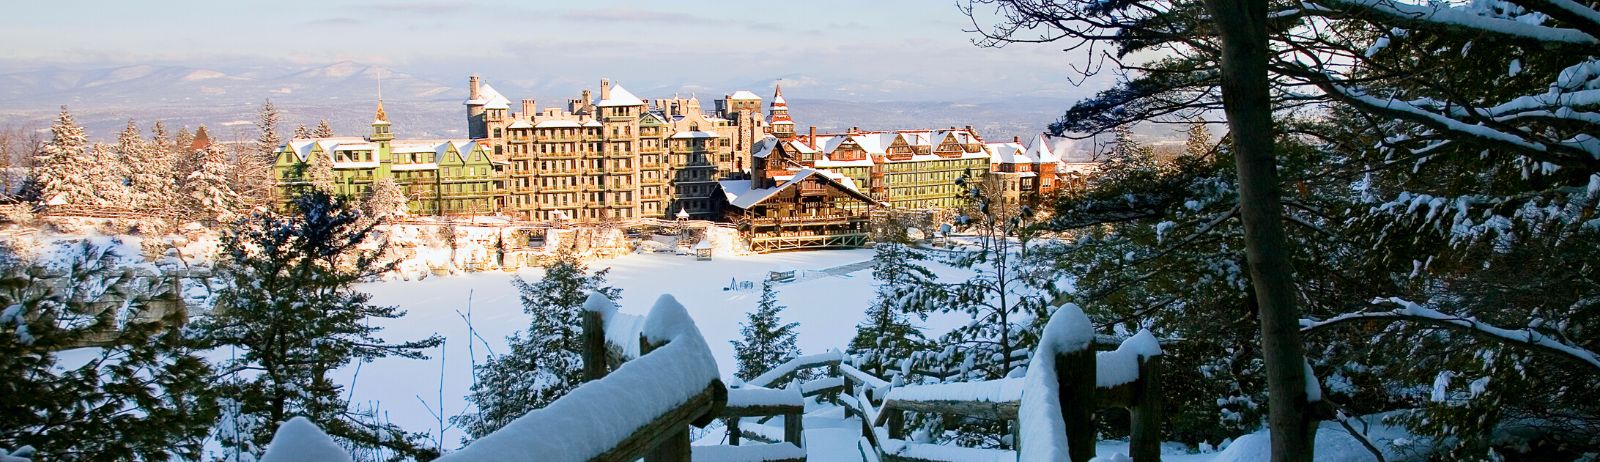 Wintertime at Mohonk Mountain House